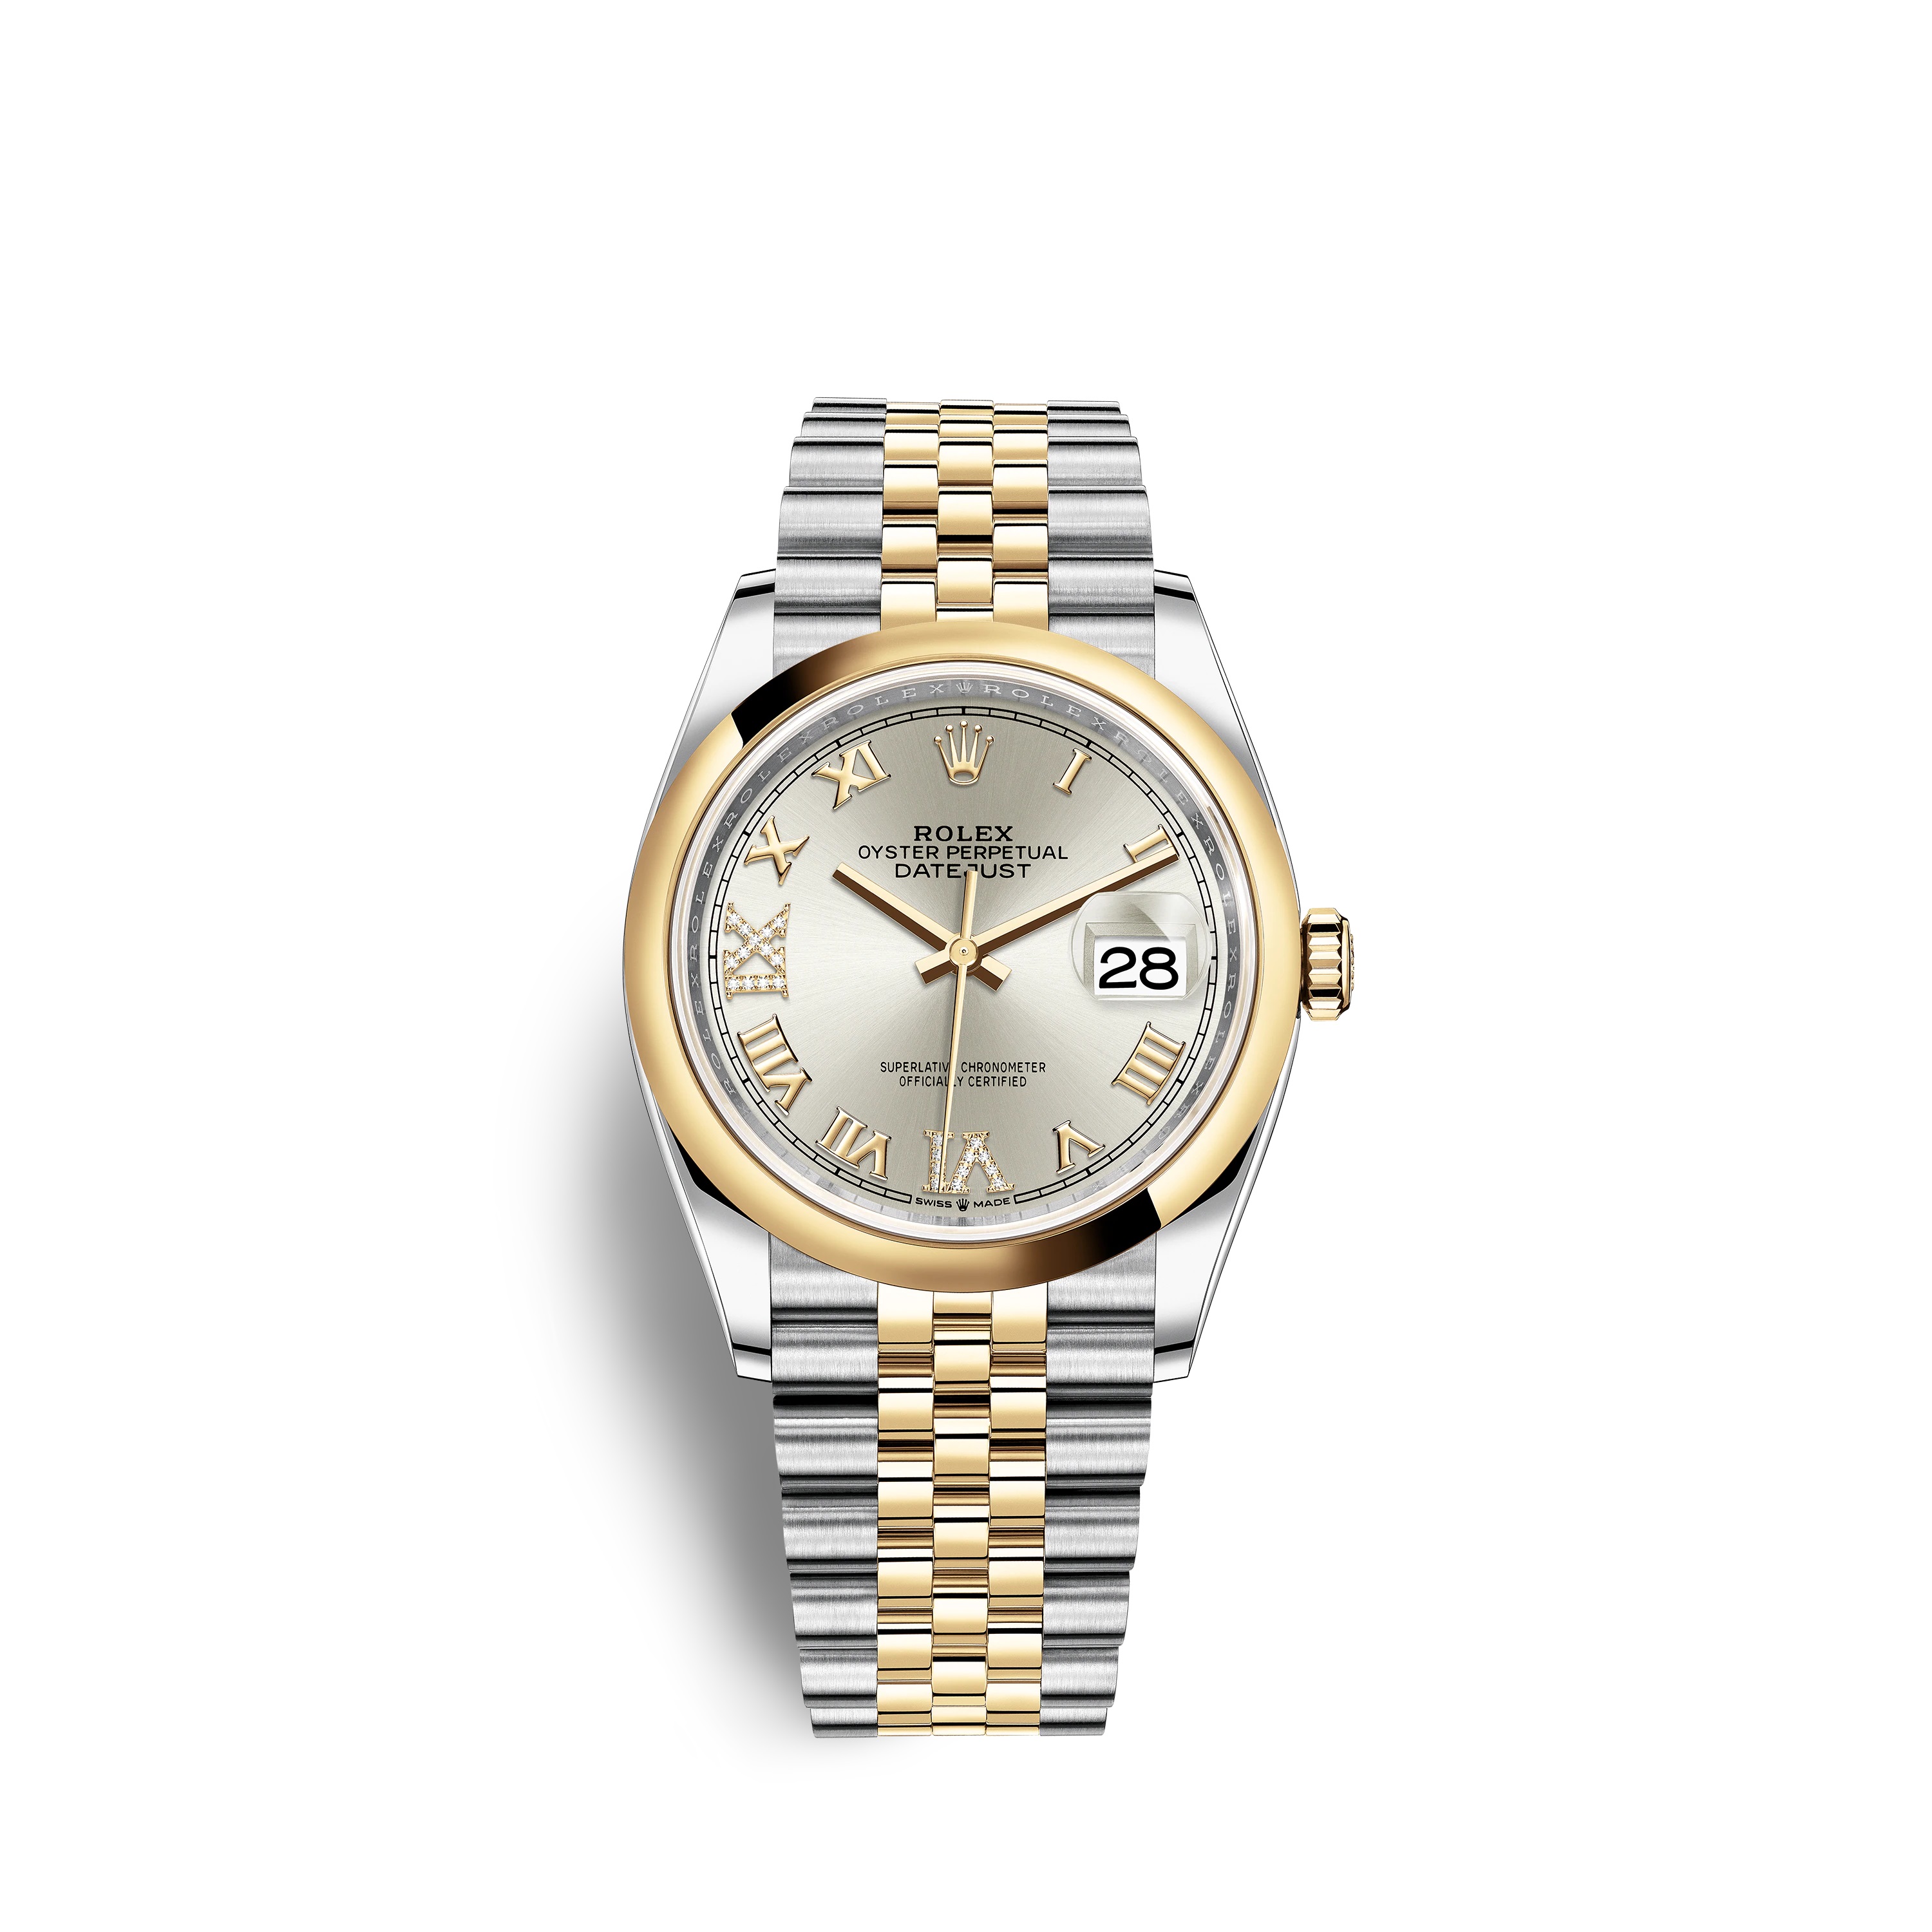 Datejust 36 126203 Gold & Stainless Steel Watch (Silver Set with Diamonds)